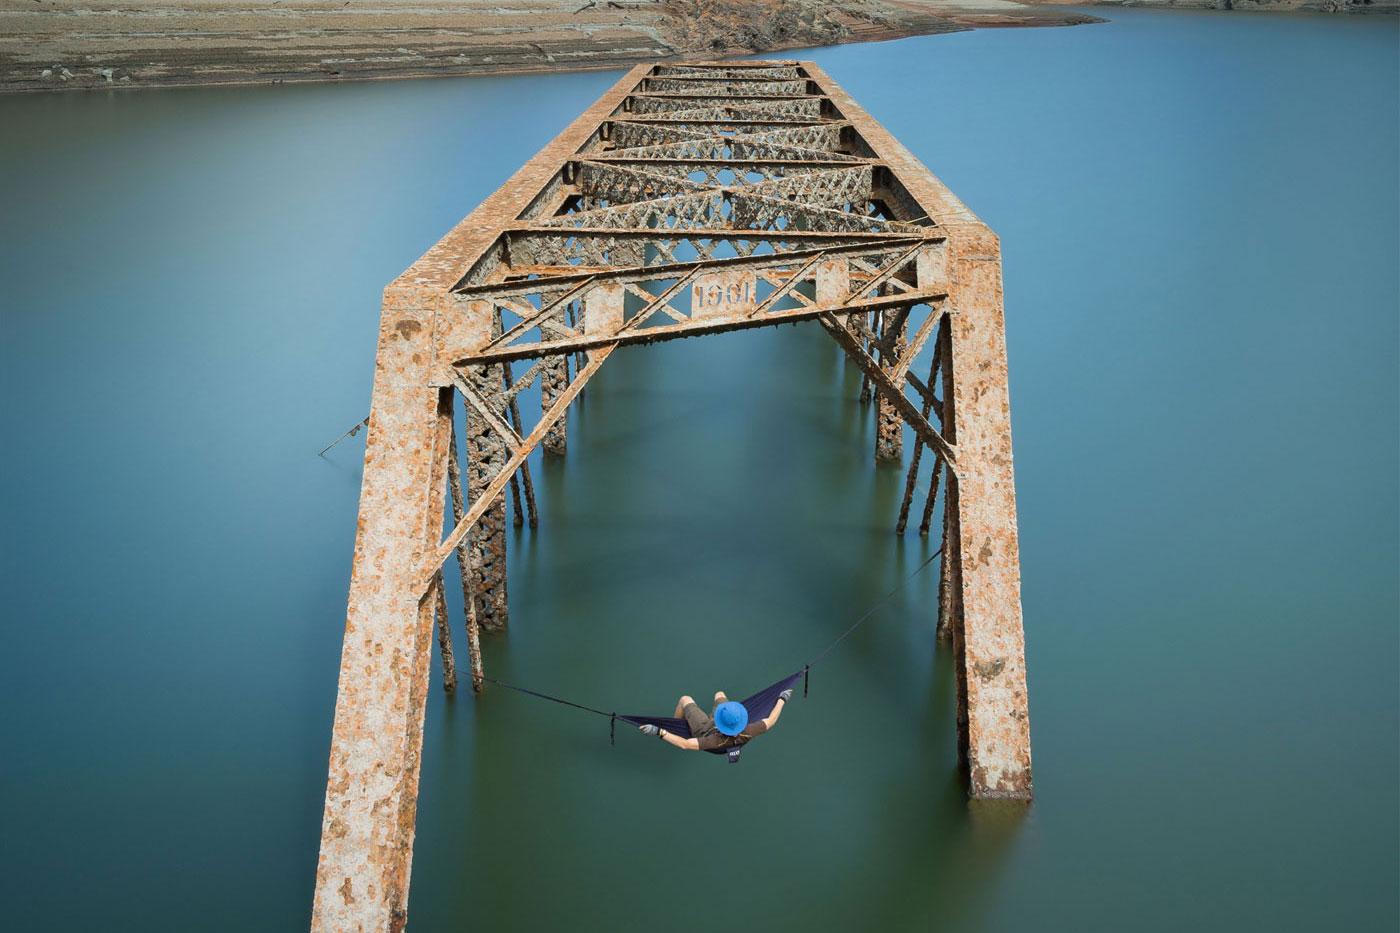 Hammocks to help you and Mother Nature take a load off